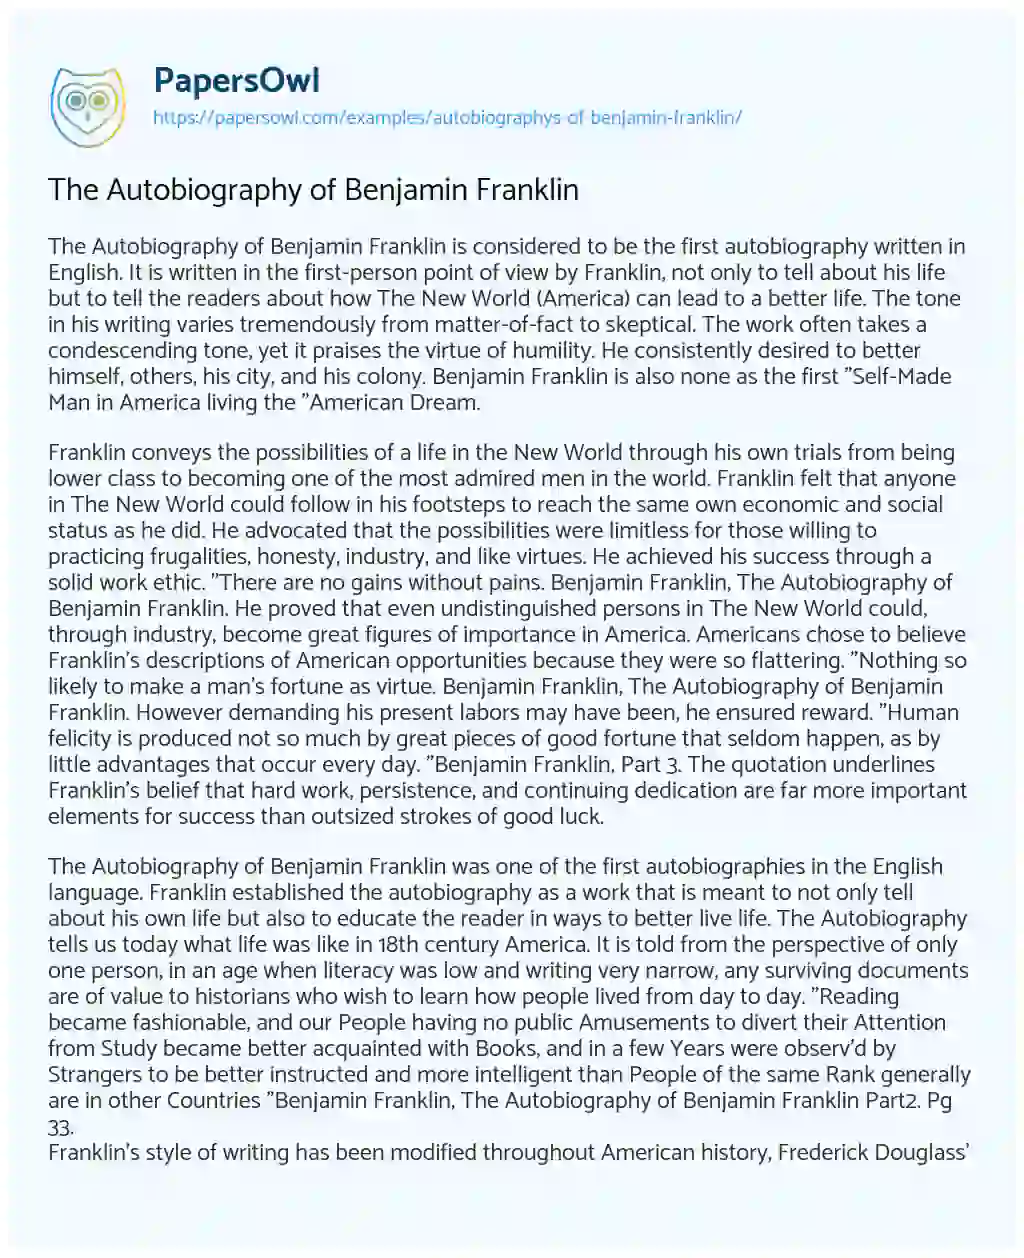 Essay on The Autobiography of Benjamin Franklin